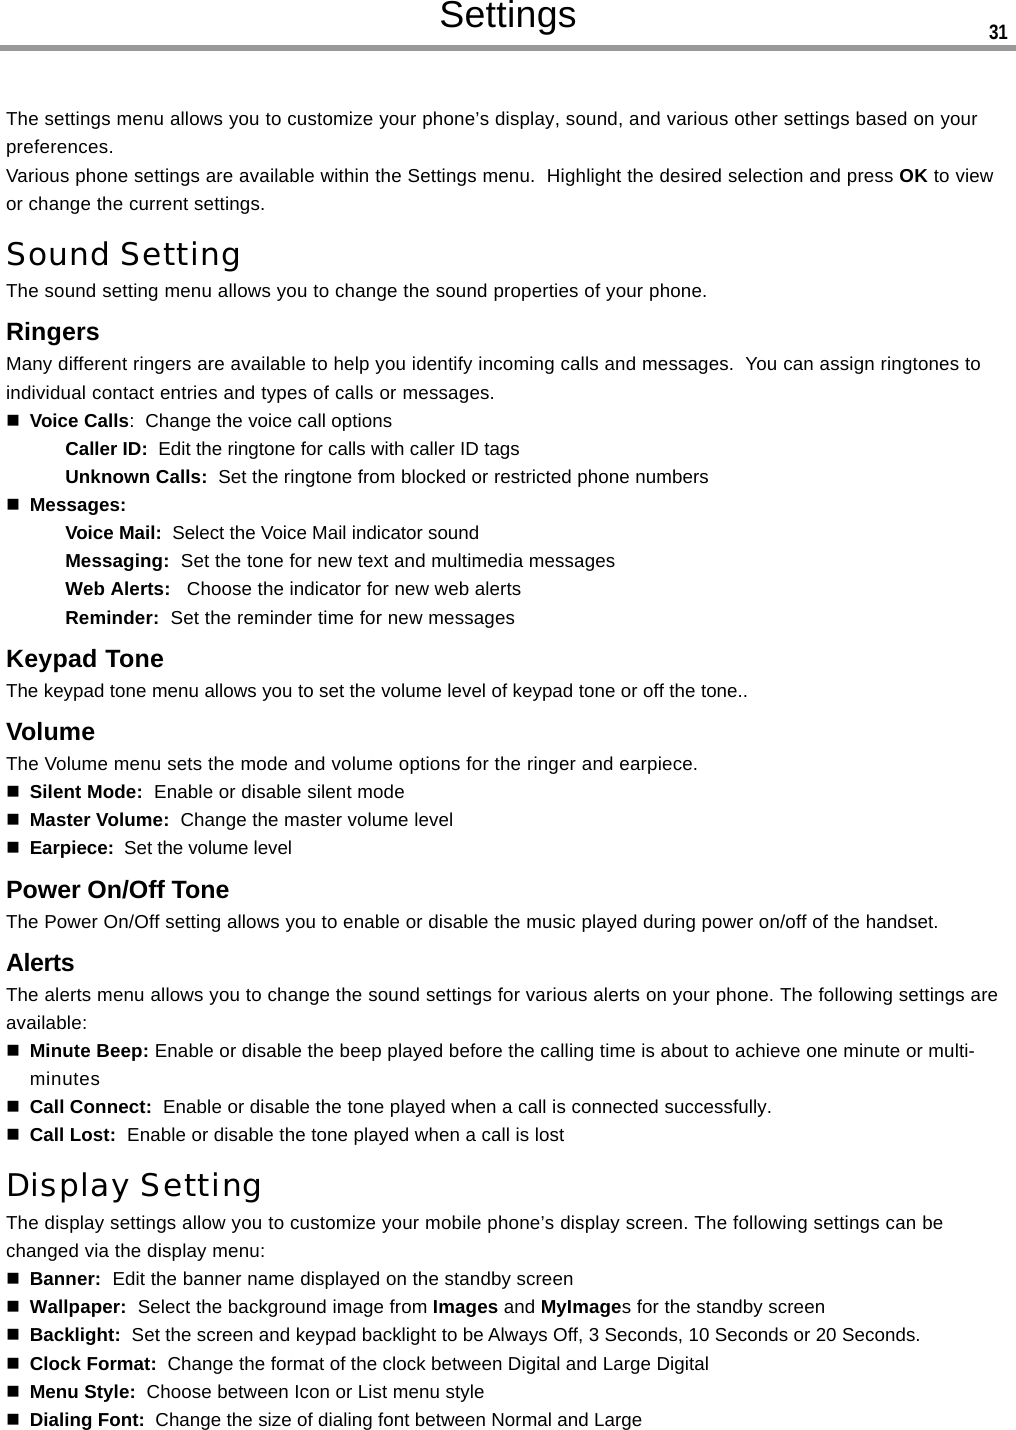 SettingsThe settings menu allows you to customize your phone’s display, sound, and various other settings based on yourpreferences.Various phone settings are available within the Settings menu.  Highlight the desired selection and press OK to viewor change the current settings.Sound SettingThe sound setting menu allows you to change the sound properties of your phone.RingersMany different ringers are available to help you identify incoming calls and messages.  You can assign ringtones toindividual contact entries and types of calls or messages.Voice Calls:  Change the voice call optionsCaller ID:  Edit the ringtone for calls with caller ID tagsUnknown Calls:  Set the ringtone from blocked or restricted phone numbersMessages:Voice Mail:  Select the Voice Mail indicator soundMessaging:  Set the tone for new text and multimedia messagesWeb Alerts:   Choose the indicator for new web alertsReminder:  Set the reminder time for new messagesKeypad ToneThe keypad tone menu allows you to set the volume level of keypad tone or off the tone..VolumeThe Volume menu sets the mode and volume options for the ringer and earpiece.Silent Mode:  Enable or disable silent modeMaster Volume:  Change the master volume levelEarpiece:  Set the volume levelPower On/Off ToneThe Power On/Off setting allows you to enable or disable the music played during power on/off of the handset.AlertsThe alerts menu allows you to change the sound settings for various alerts on your phone. The following settings areavailable:Minute Beep: Enable or disable the beep played before the calling time is about to achieve one minute or multi-minutesCall Connect:  Enable or disable the tone played when a call is connected successfully.Call Lost:  Enable or disable the tone played when a call is lostDisplay SettingThe display settings allow you to customize your mobile phone’s display screen. The following settings can bechanged via the display menu:Banner:  Edit the banner name displayed on the standby screenWallpaper:  Select the background image from Images and MyImages for the standby screenBacklight:  Set the screen and keypad backlight to be Always Off, 3 Seconds, 10 Seconds or 20 Seconds.Clock Format:  Change the format of the clock between Digital and Large DigitalMenu Style:  Choose between Icon or List menu styleDialing Font:  Change the size of dialing font between Normal and Large31